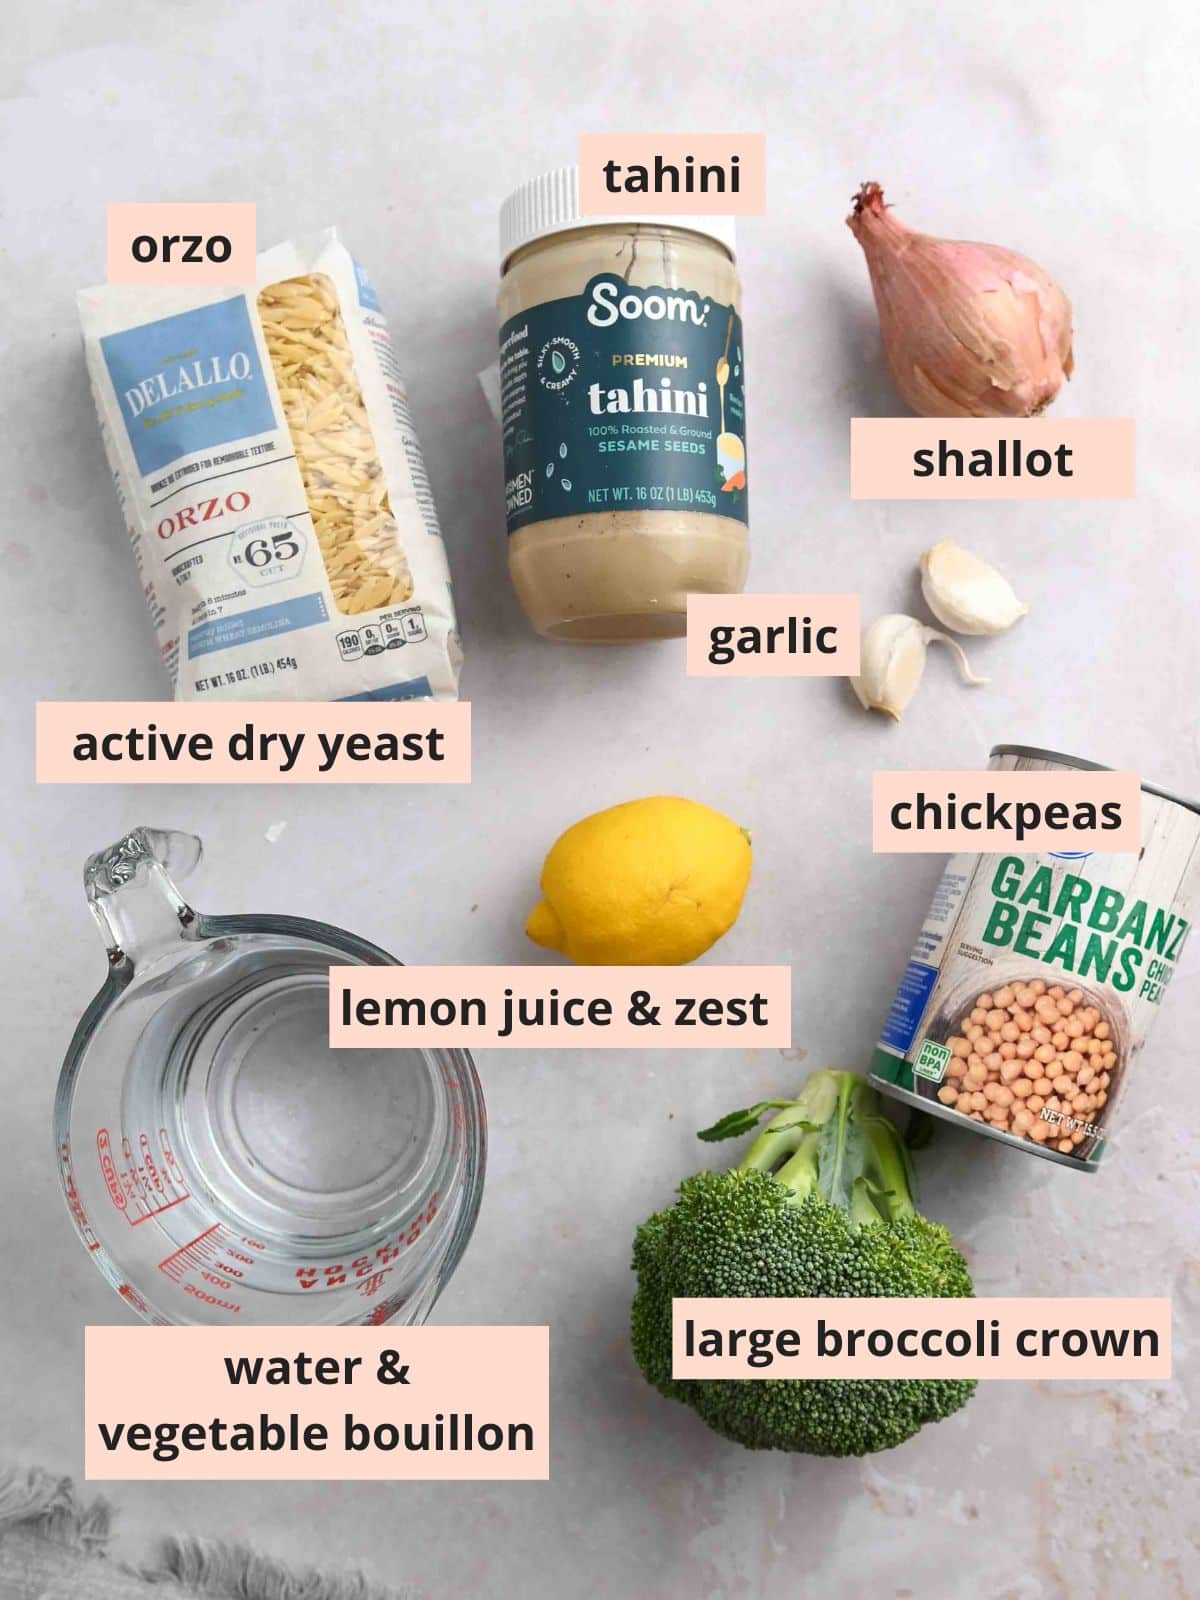 Labeled ingredients used to make tahini orzo.